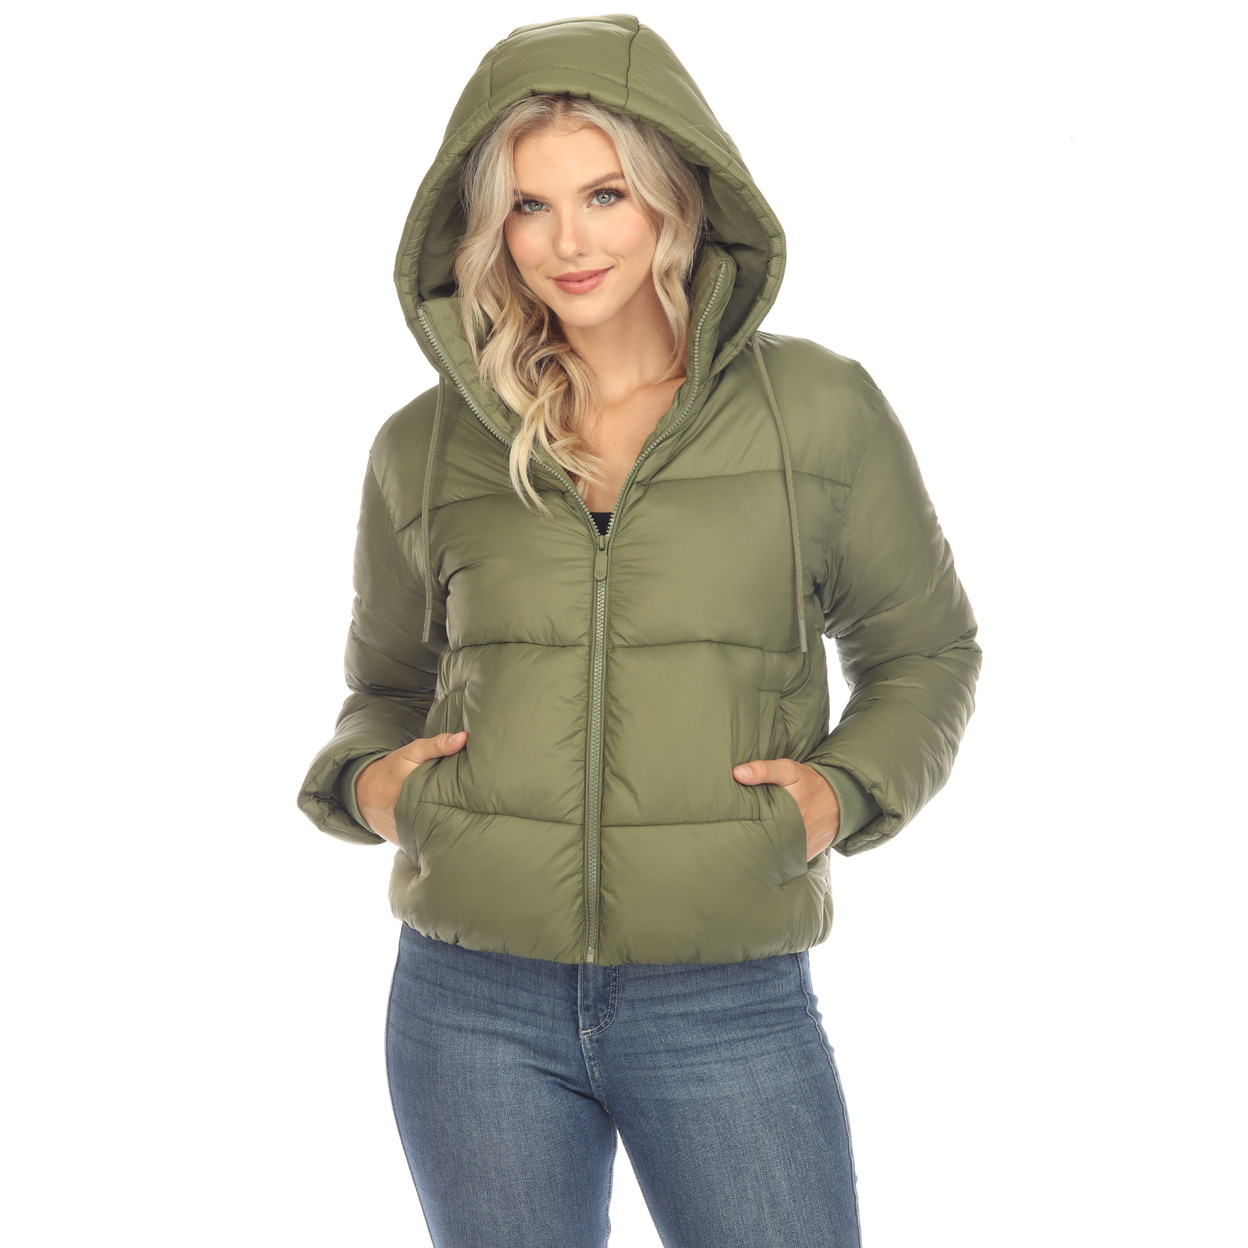 White Mark Women's Zip Hooded Puffer Jacket With Pockets - Olive, X-large